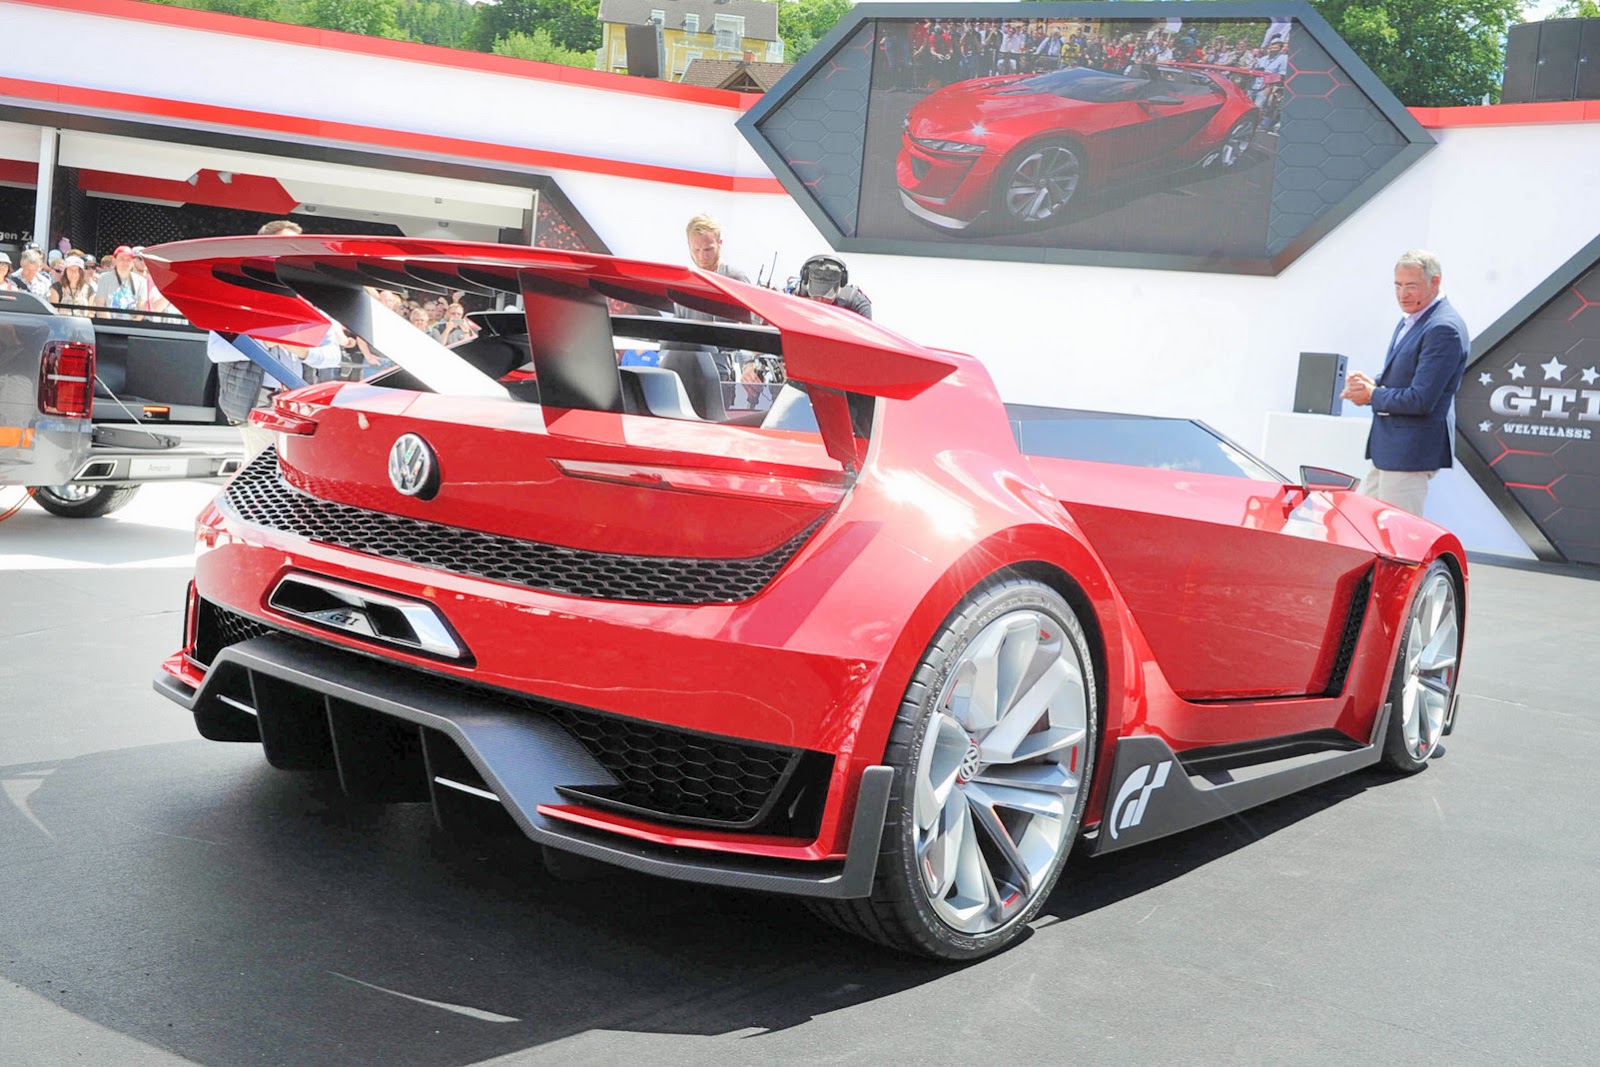 Volkswagen GTI Roadster Backgrounds, Compatible - PC, Mobile, Gadgets| 1600x1067 px